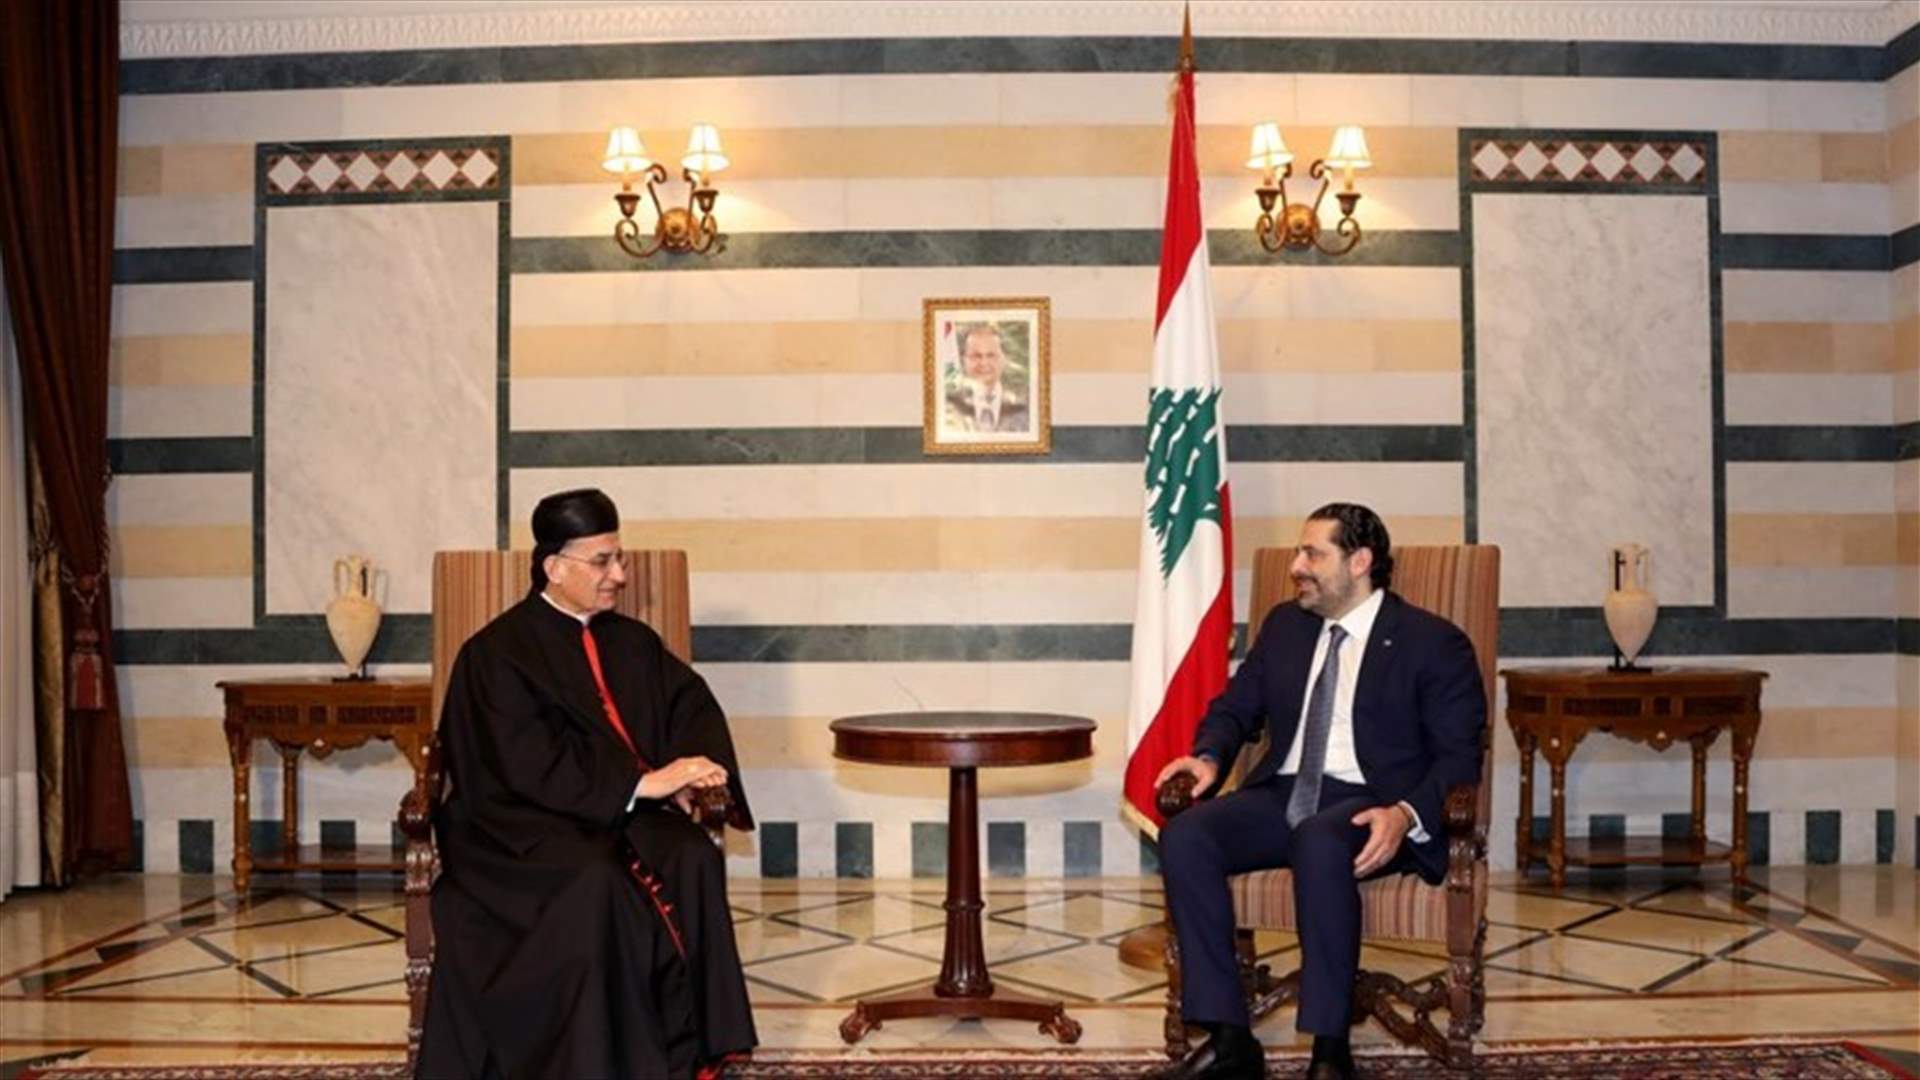 Patriarch Rai meets with PM Hariri, discusses disassociation policy